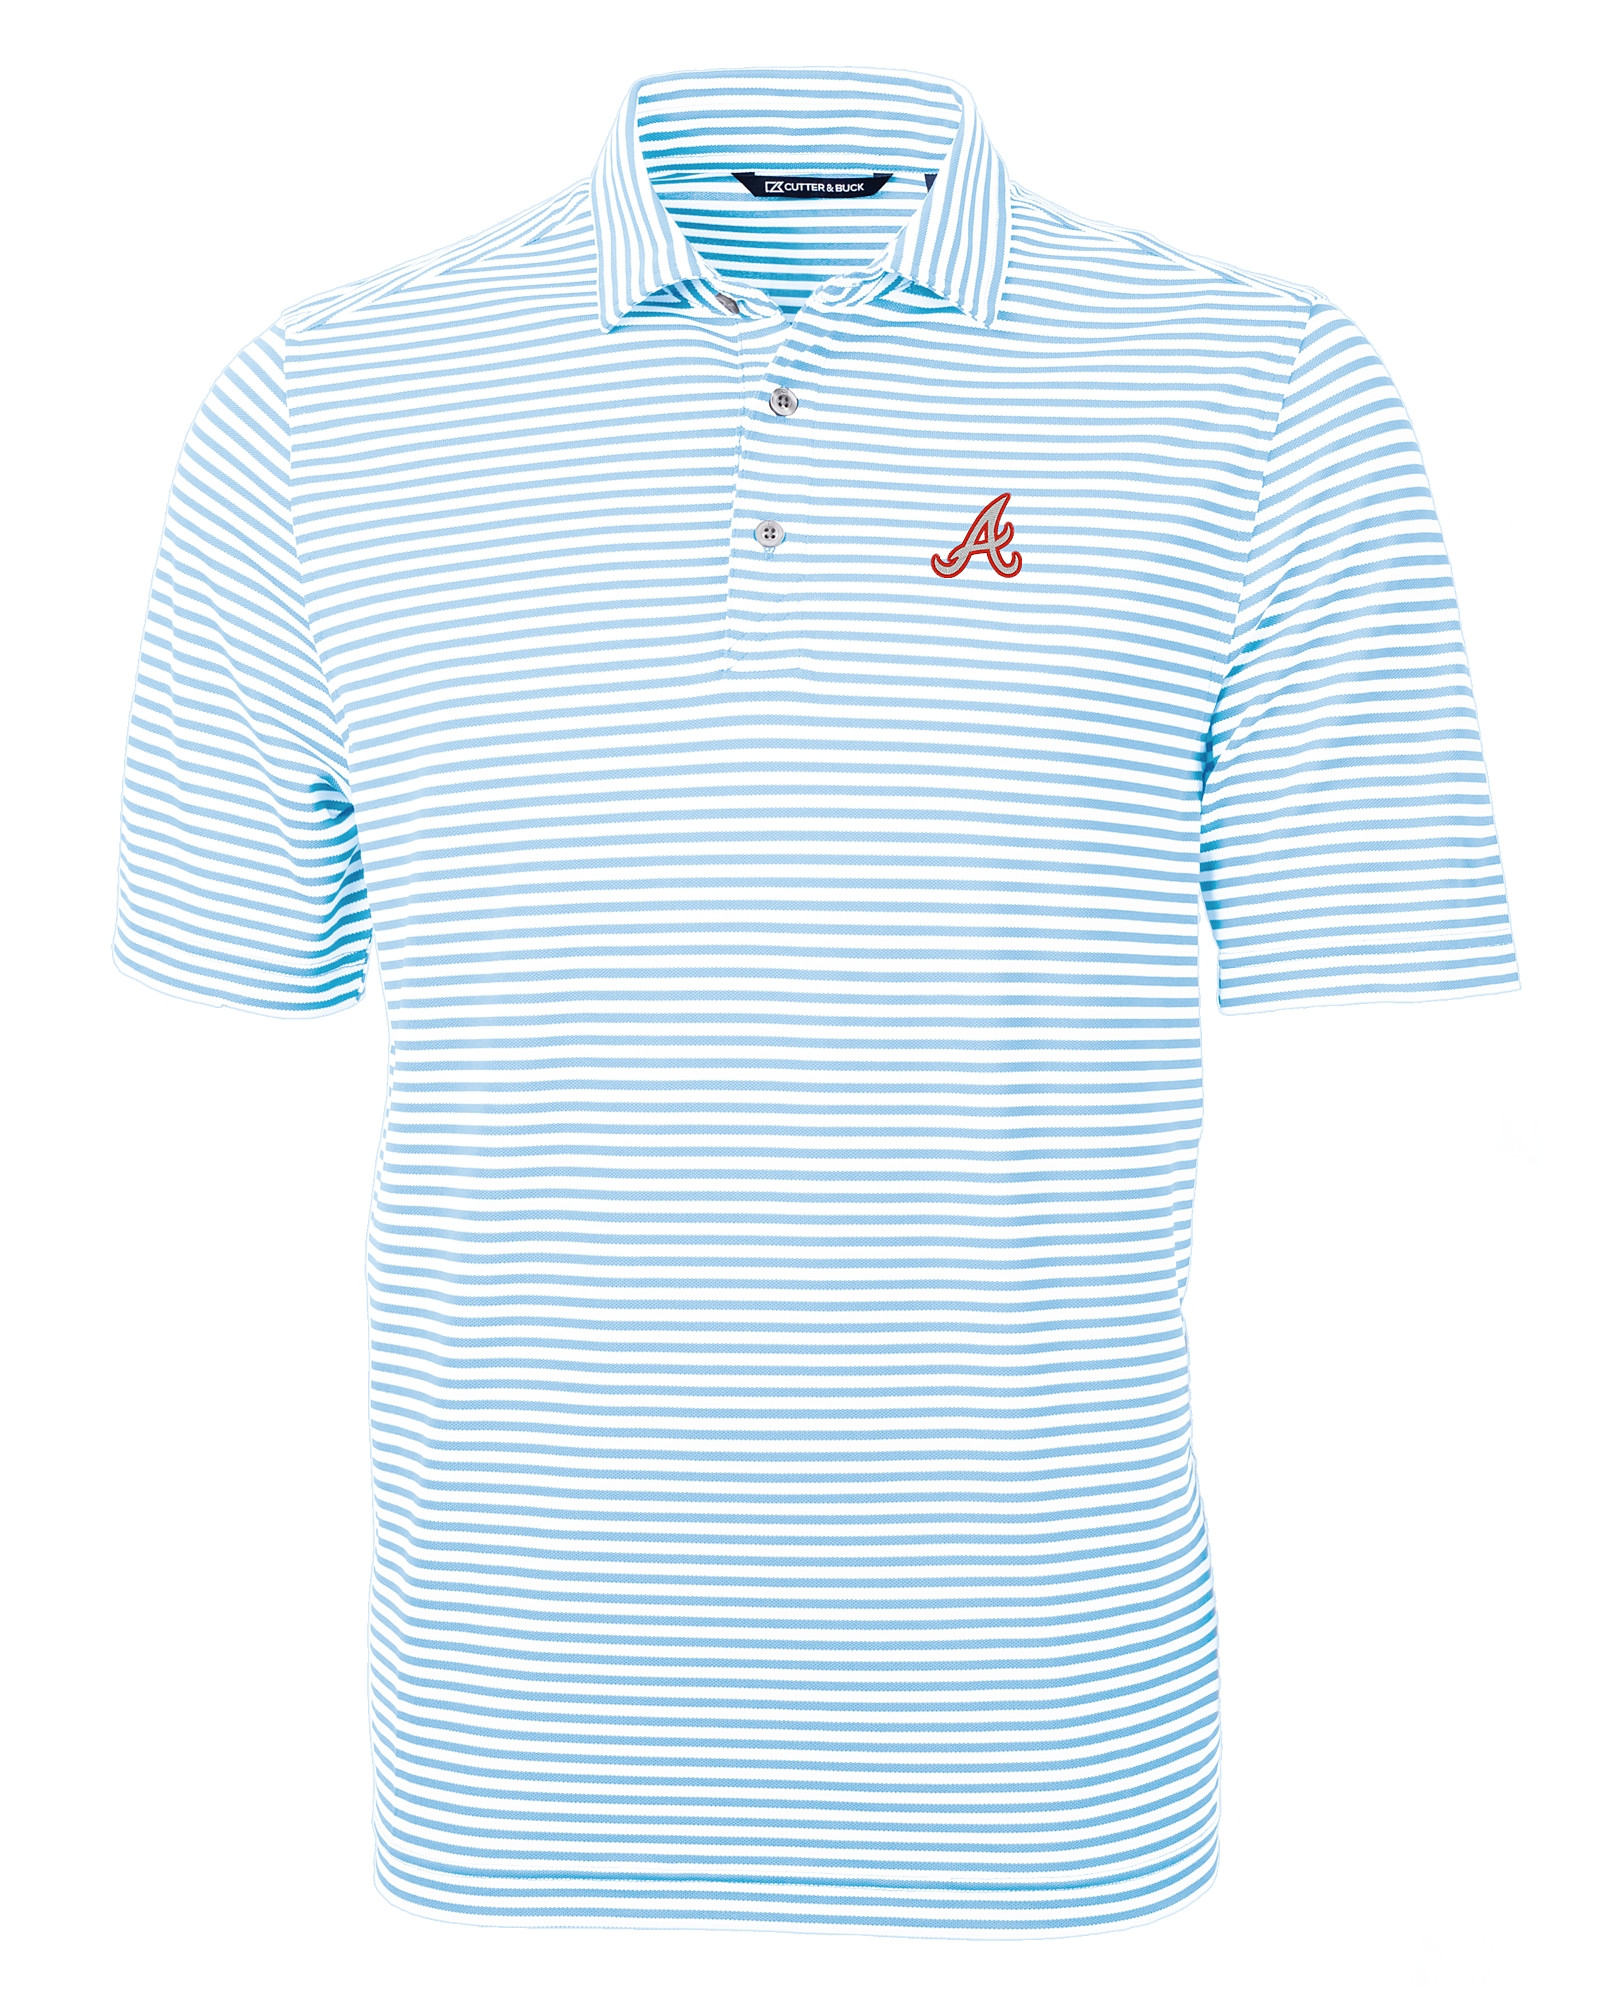 Atlanta Braves Cooperstown Cutter & Buck Virtue Eco Pique Stripe Recycled  Mens Big and Tall Polo - Cutter & Buck